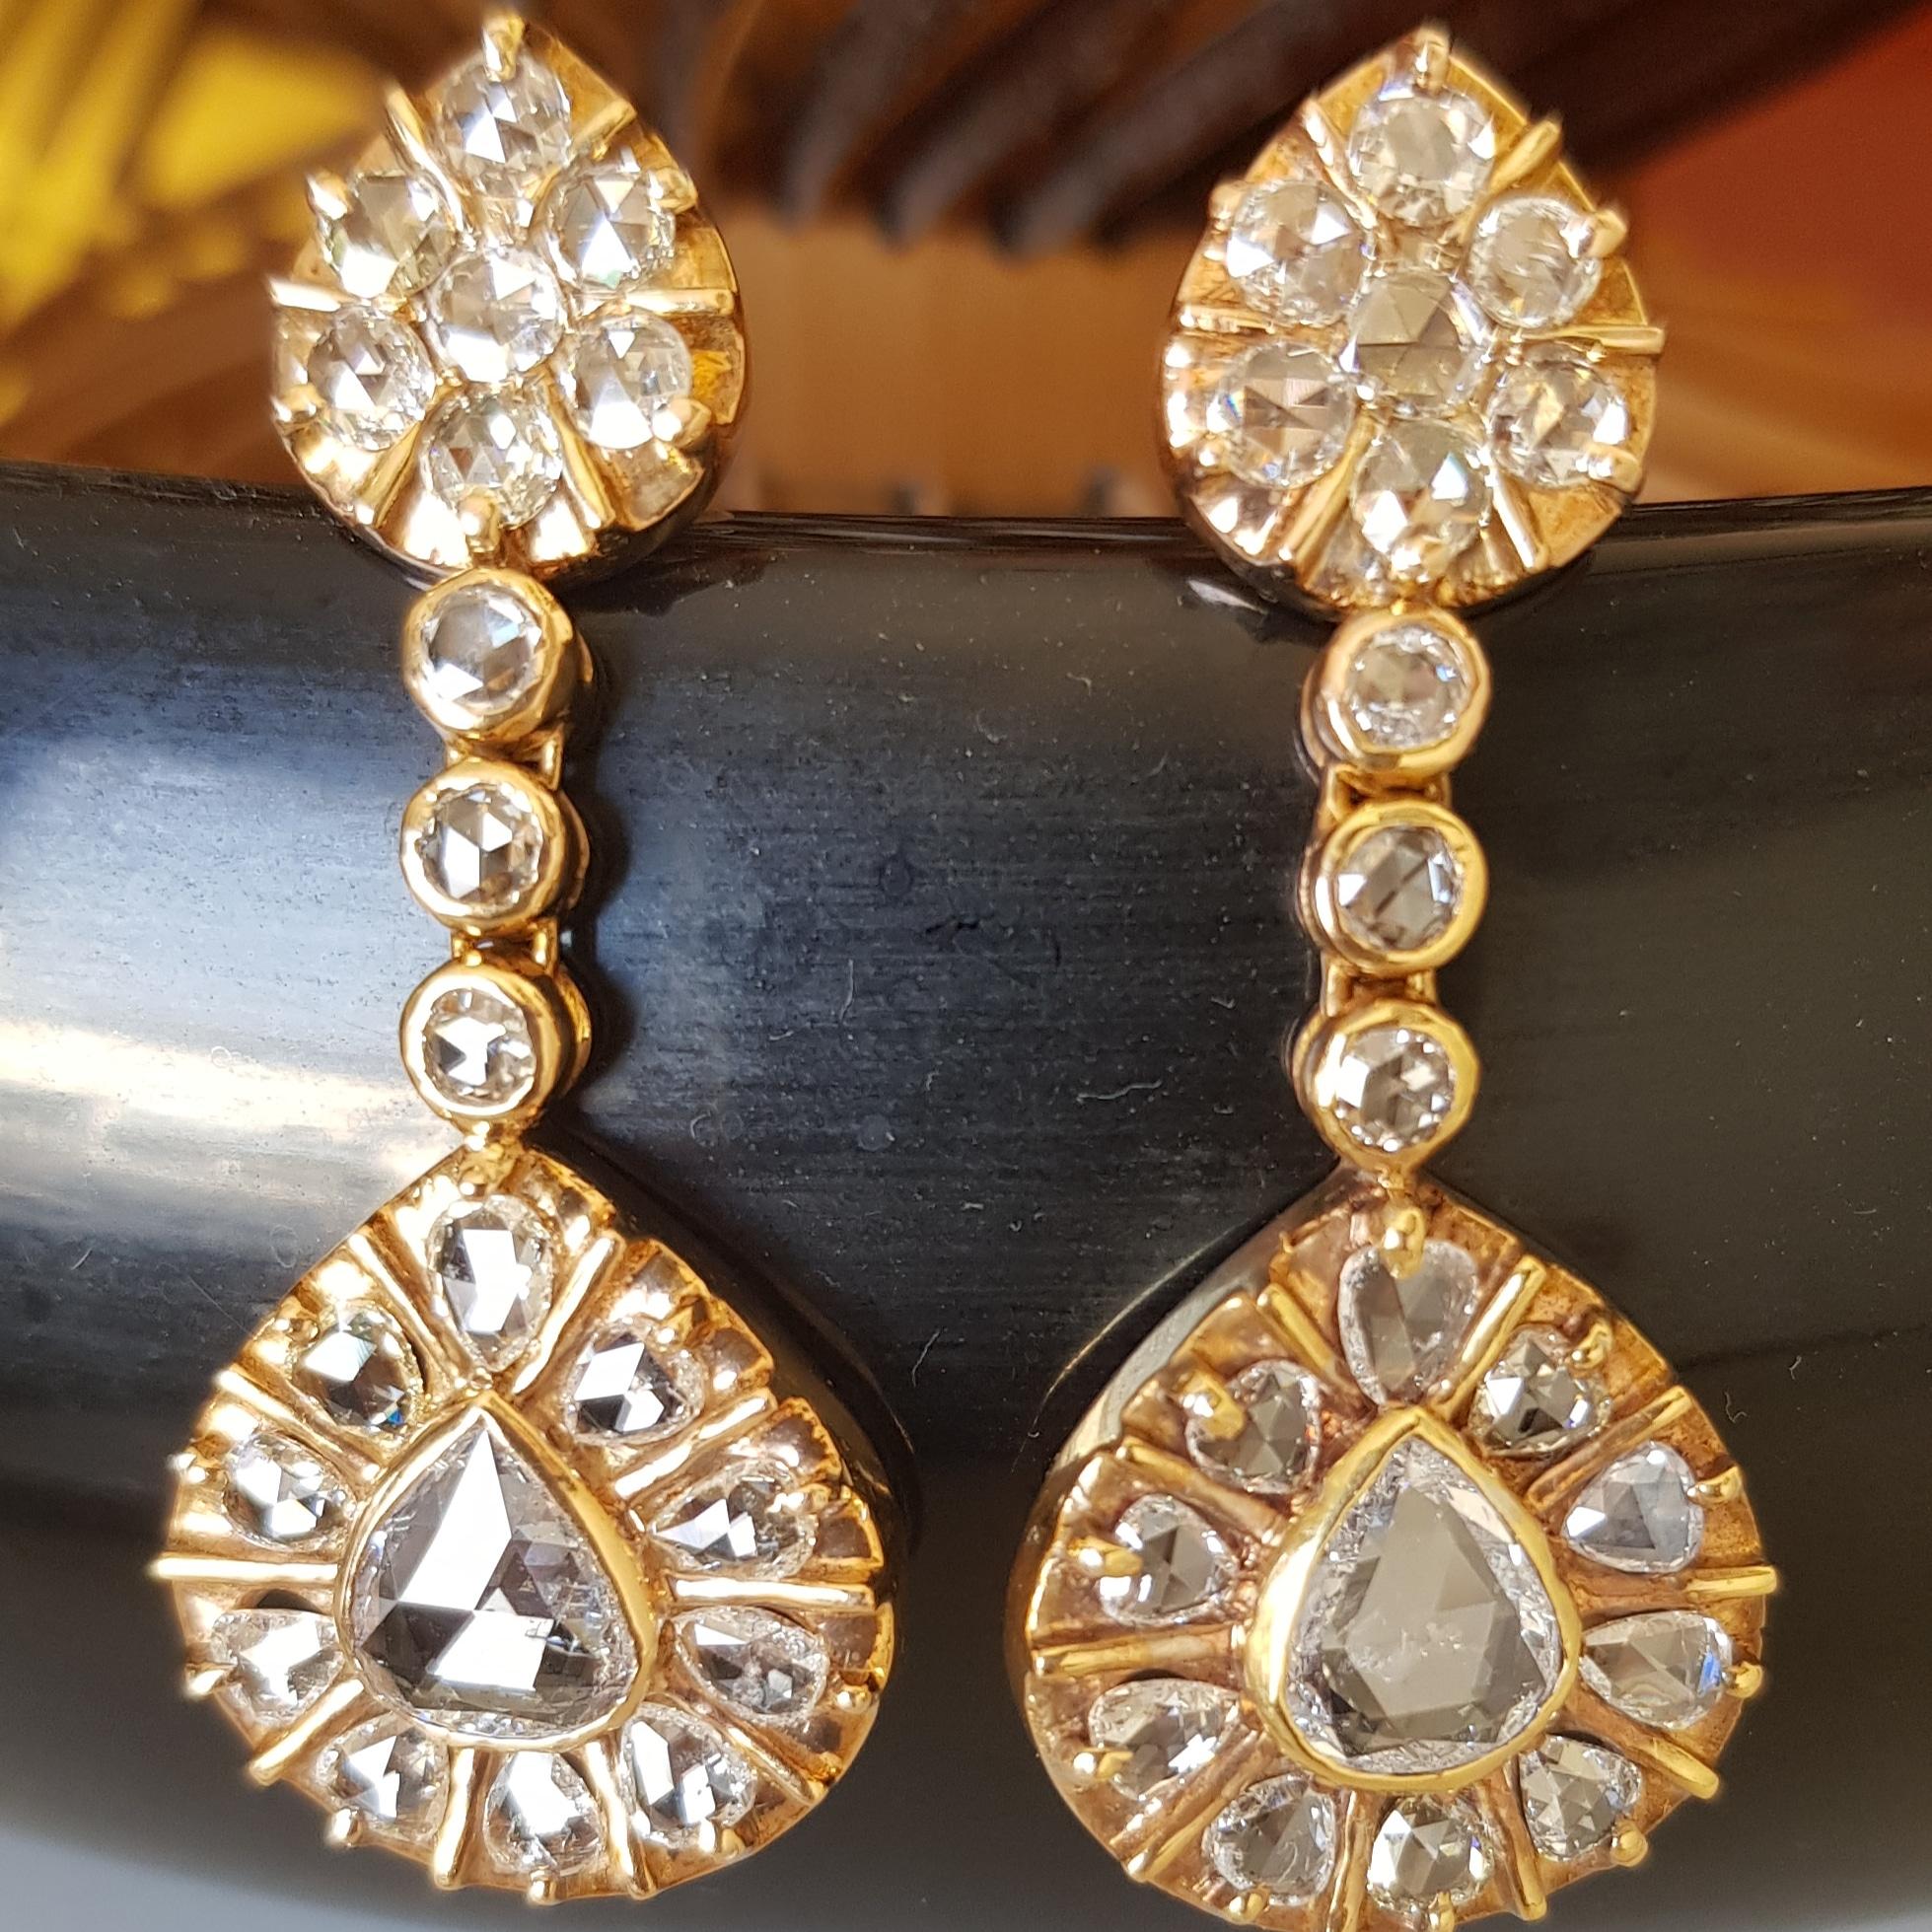 VINTAGE ROSE CUT DIAMOND PENDANT EARRINGS Ca. 1950
Hand fabricated in 22K rose gold (tested), are set with glimmering rose-cut diamonds color G-H. clarity VS to form a delightful stylized design centered with tear-drop motifs in two bodies, centered